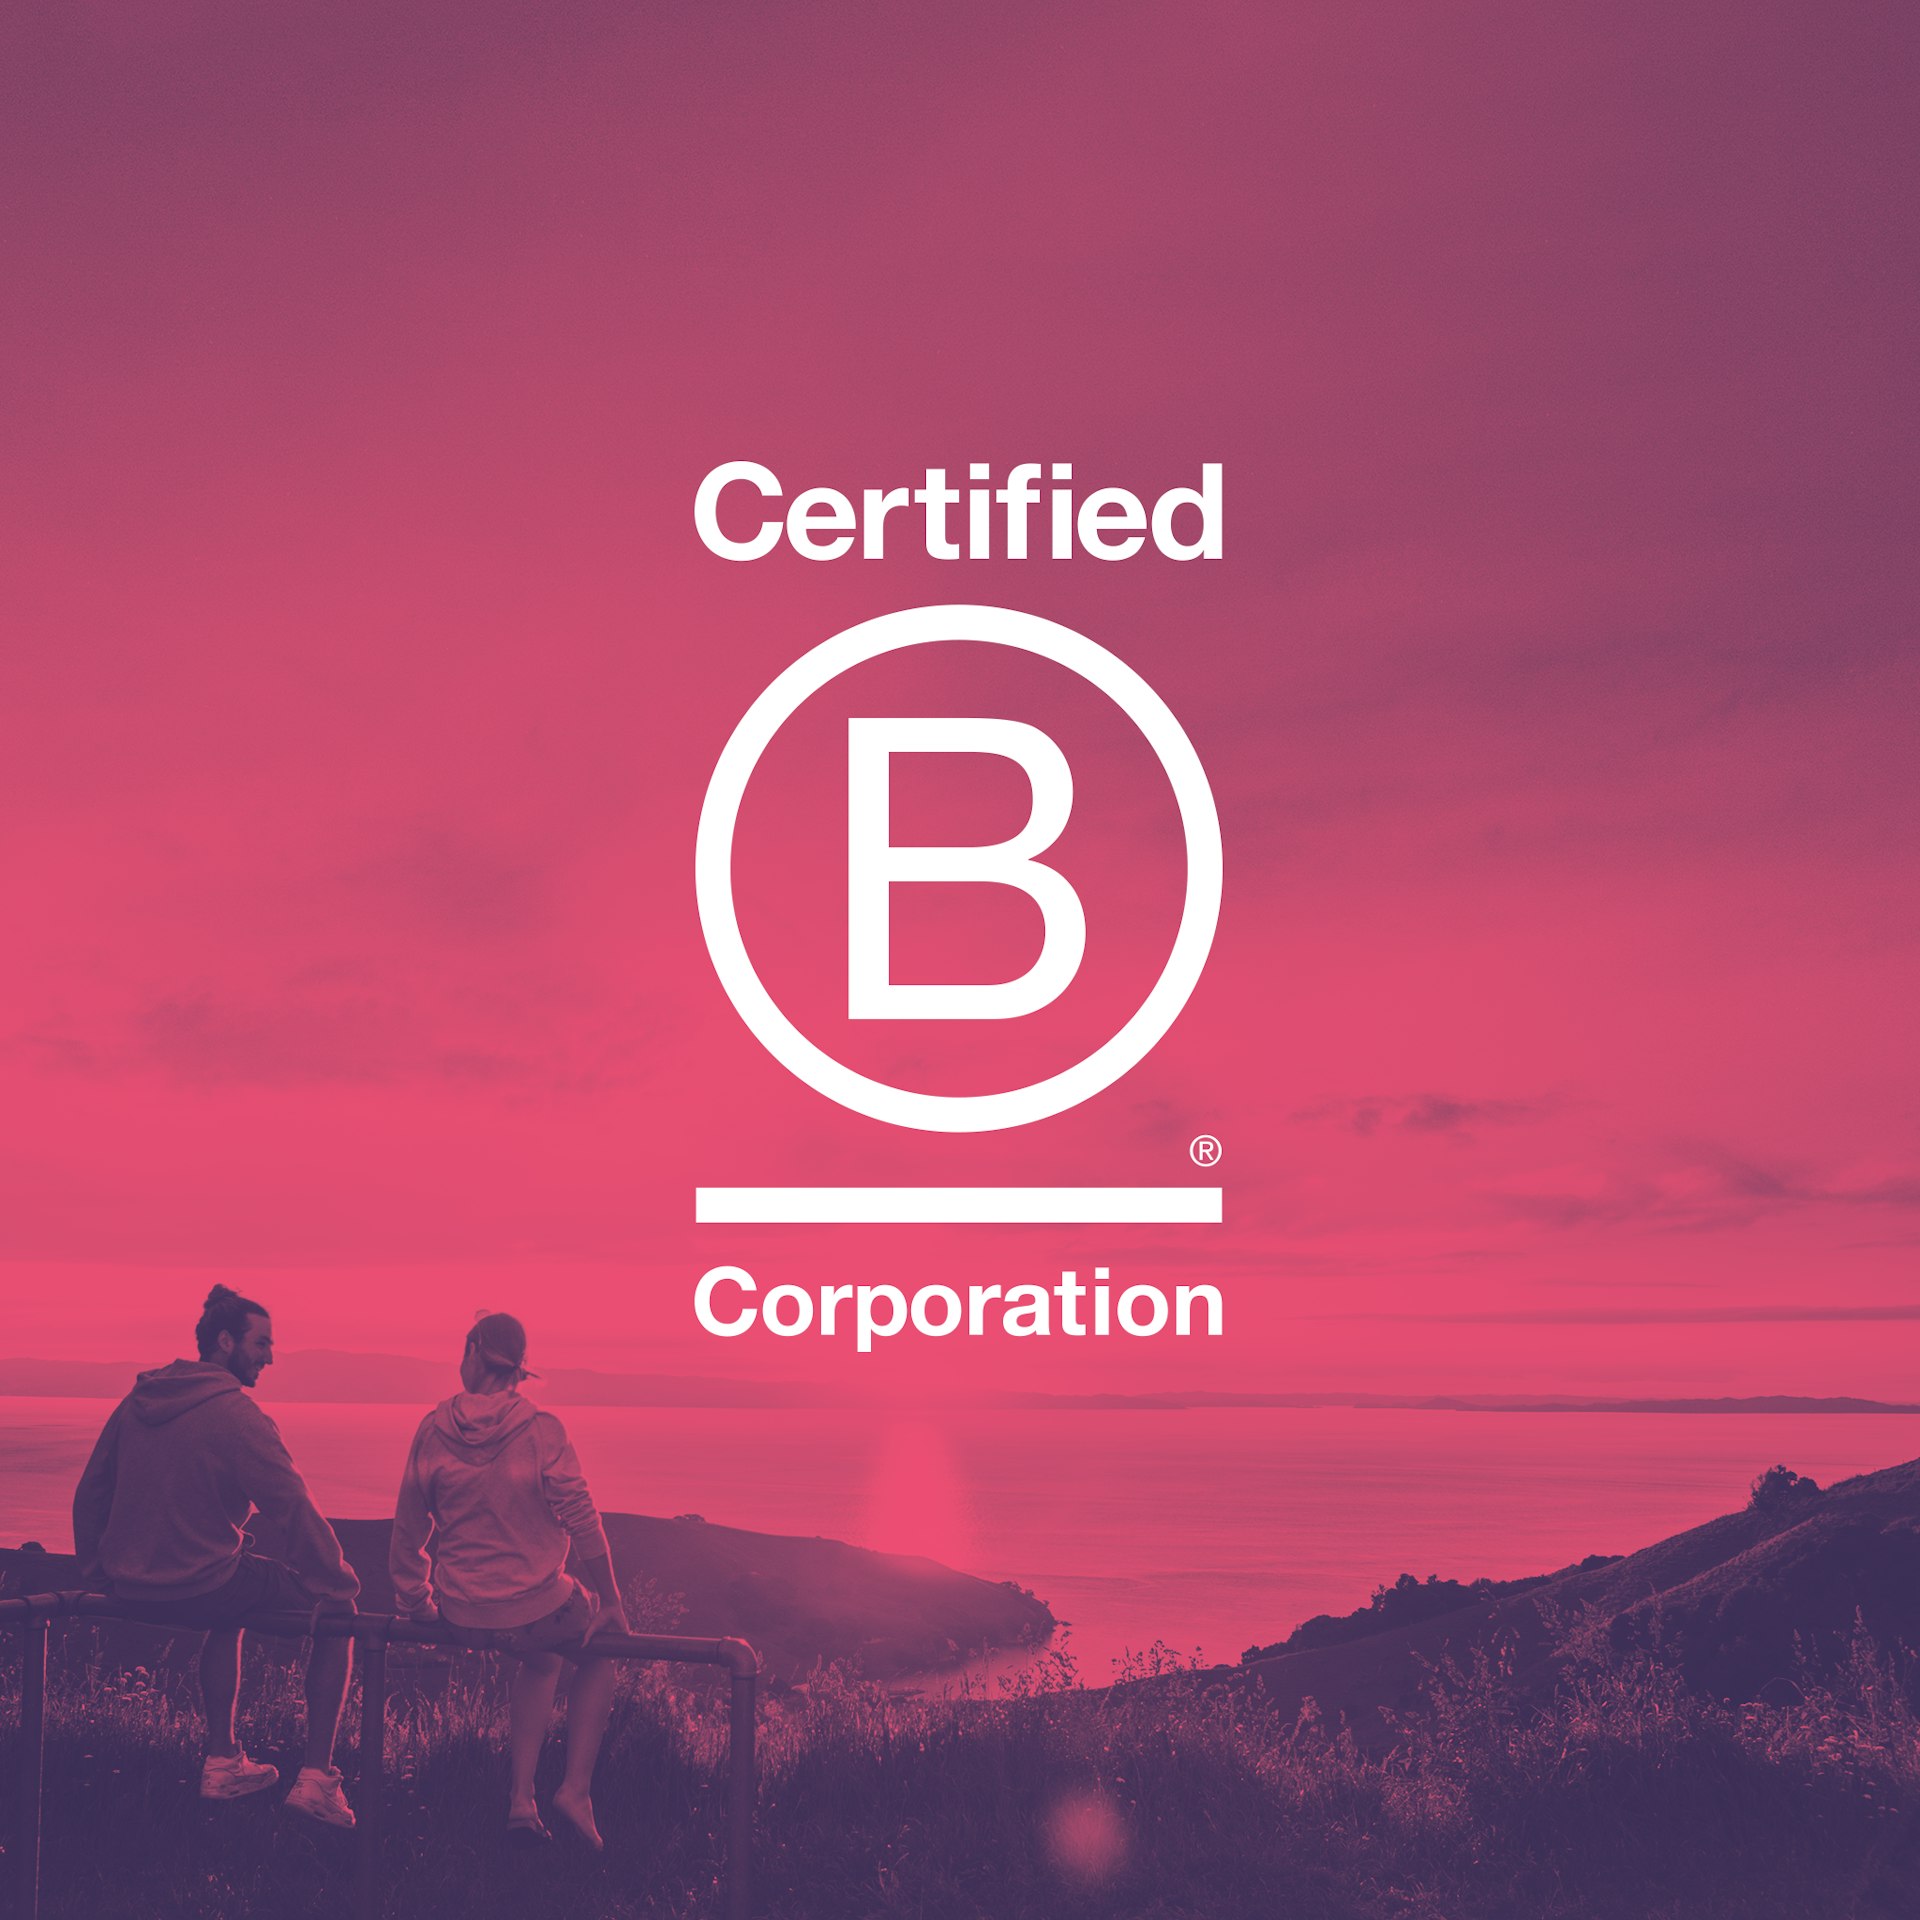 a b corp logo against a pink background